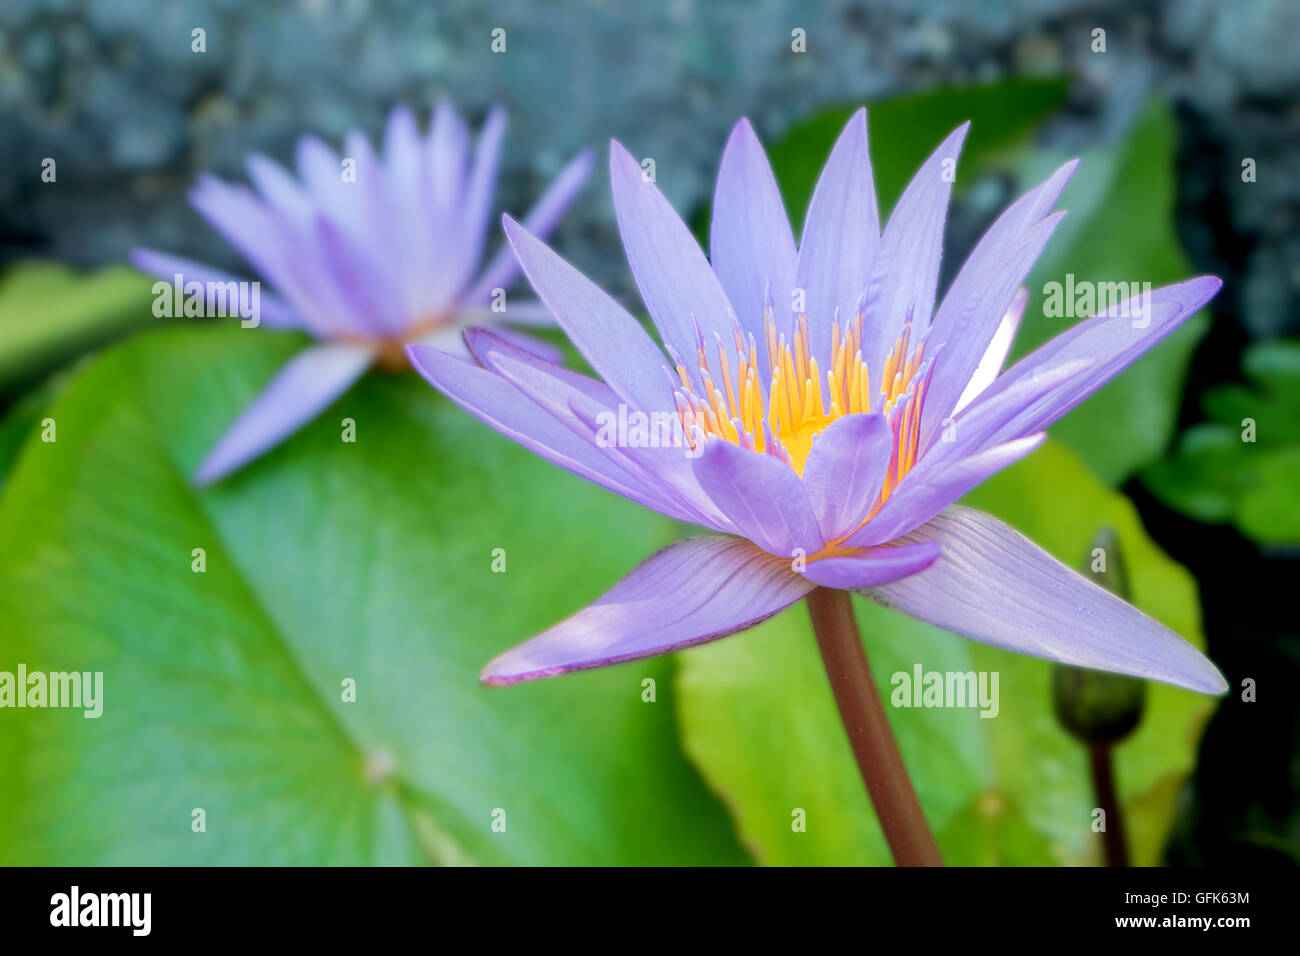 Lotus flower in purple violet color with green leaves in nature water pond Stock Photo